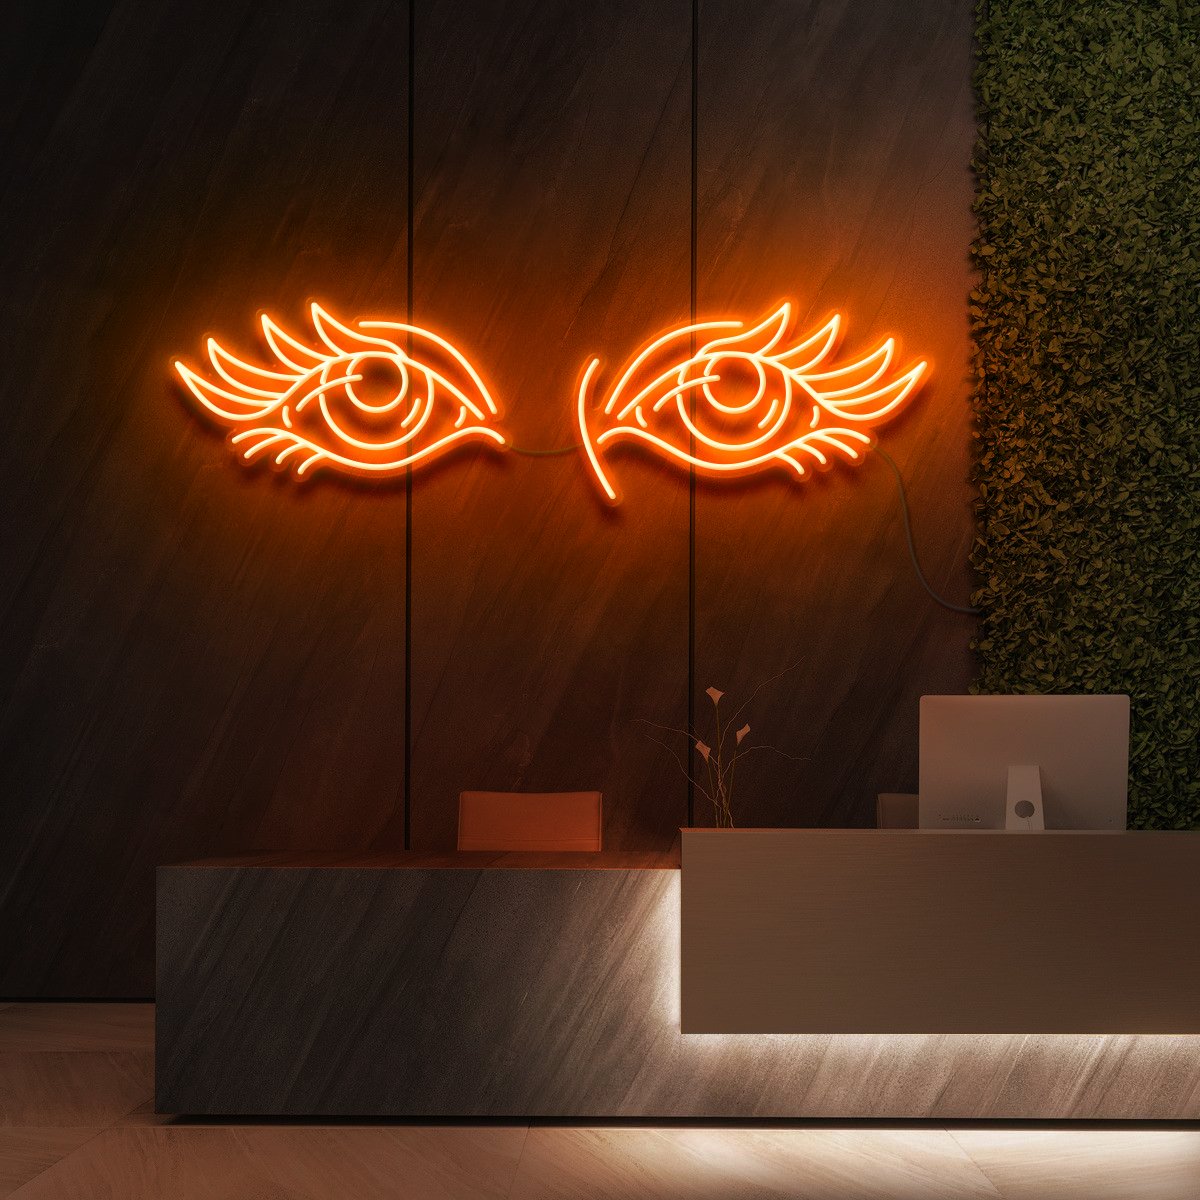 "Eyes & Lashes" Neon Sign for Beauty & Cosmetic Studios